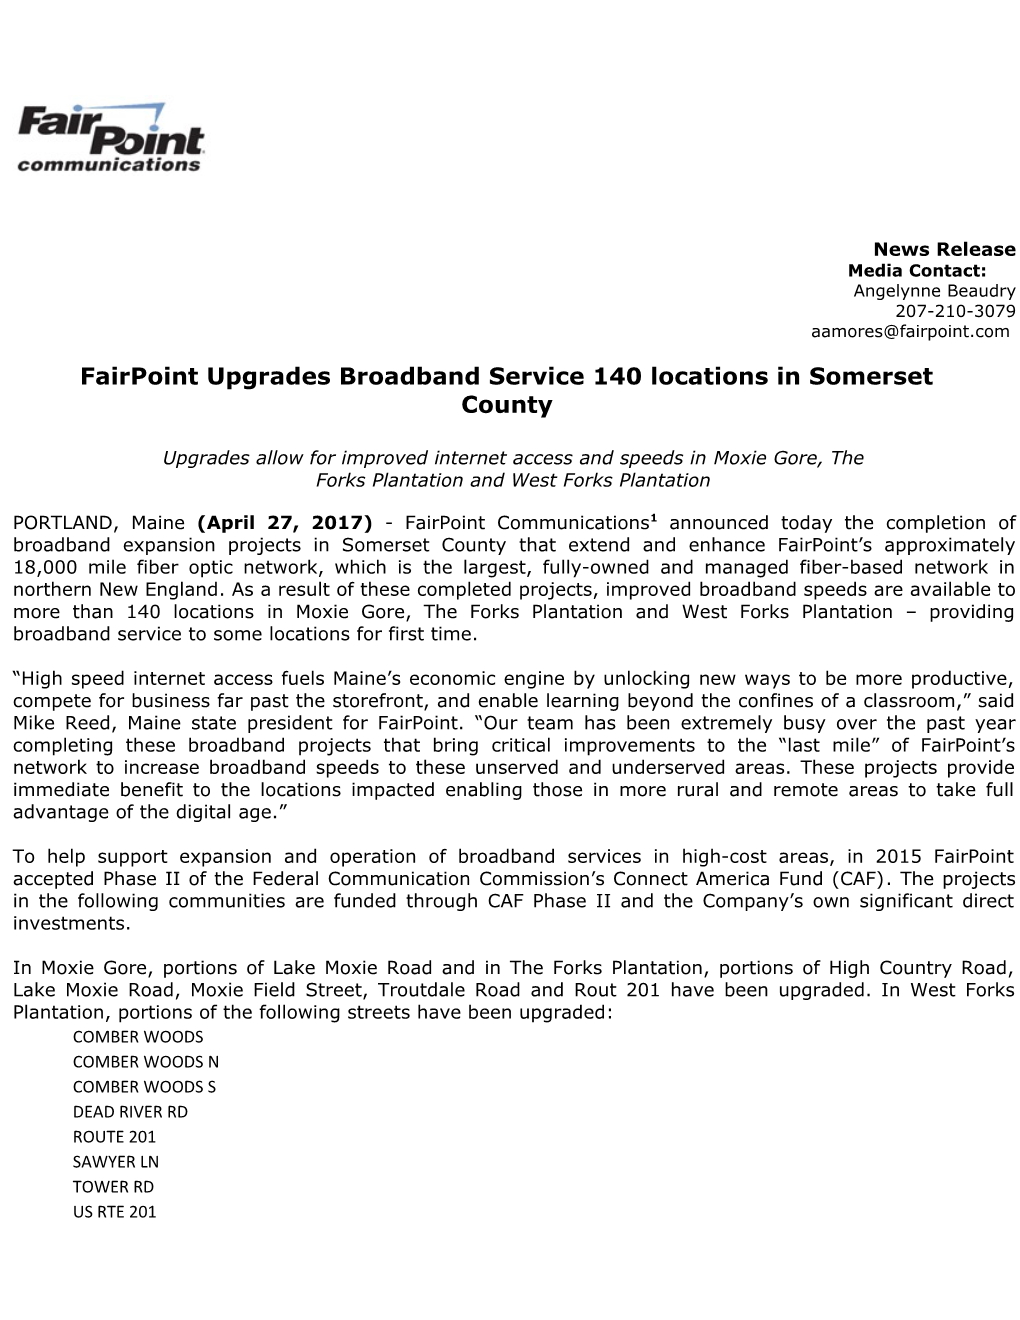 Fairpoint Upgrades Broadband Service 140 Locations in Somerset County